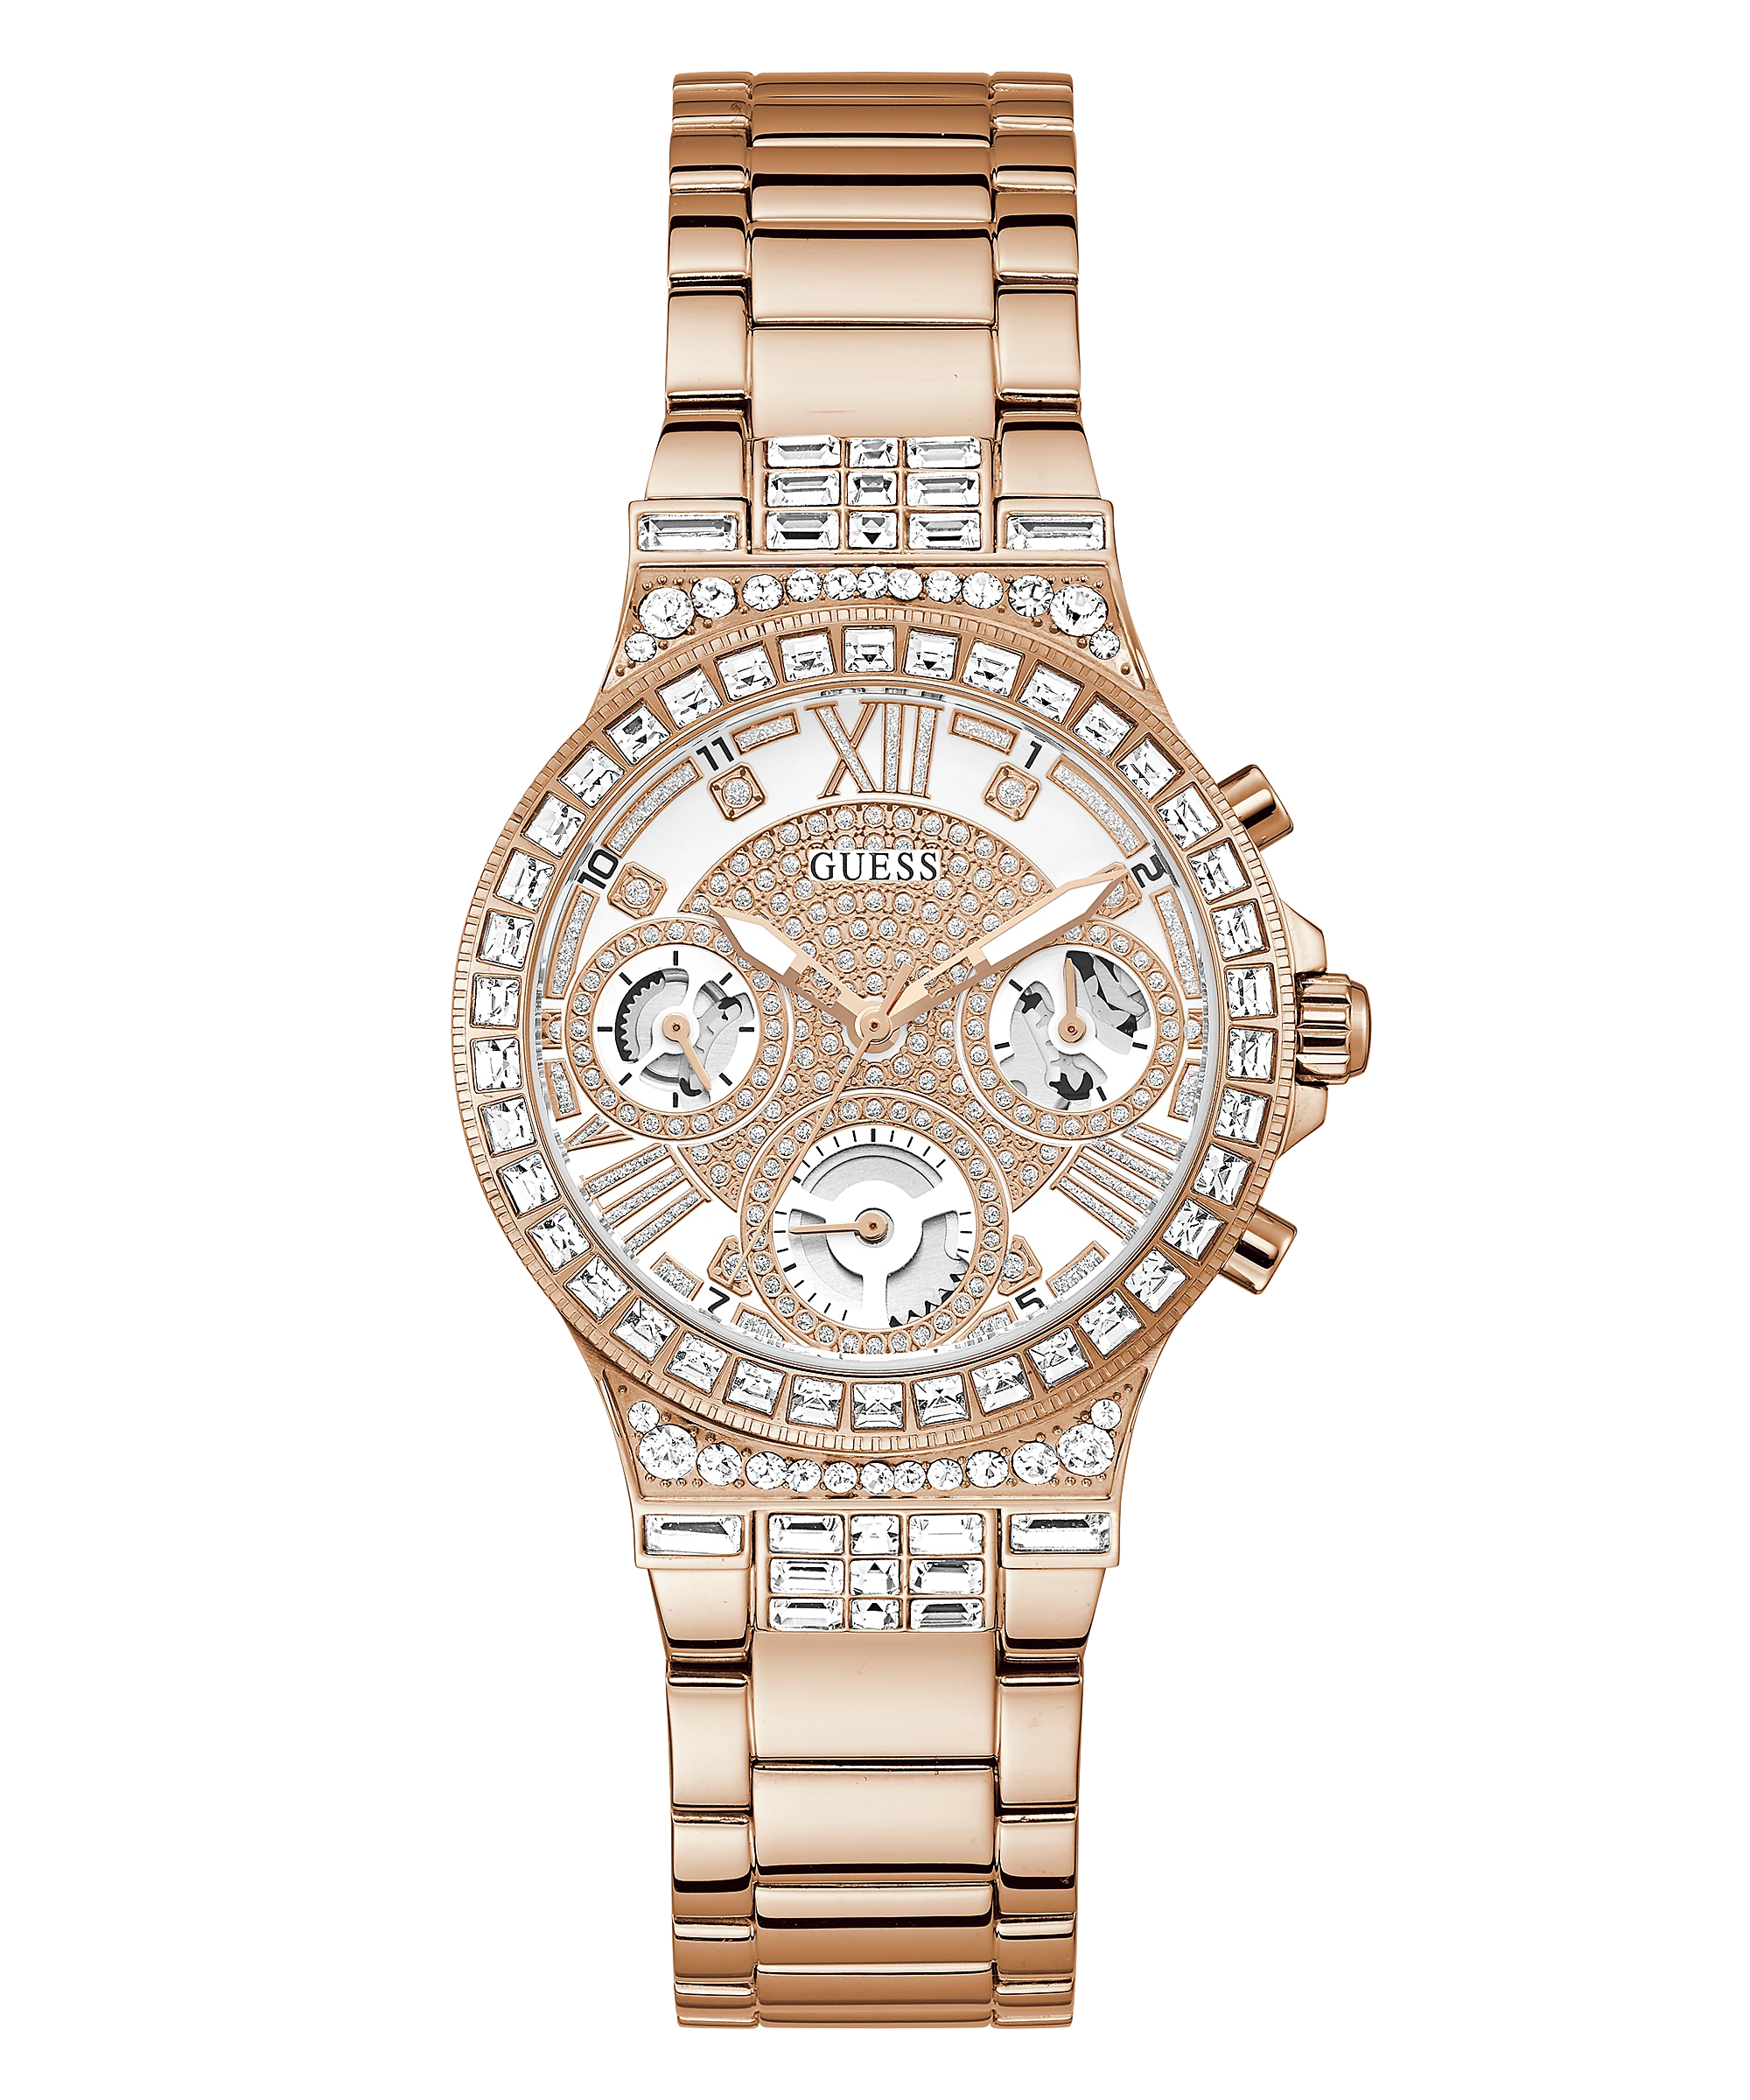 GUESS WATCH ROSE GOLD TONE CASE ROSE GOLD TONE STAINLESS STEEL WATCH